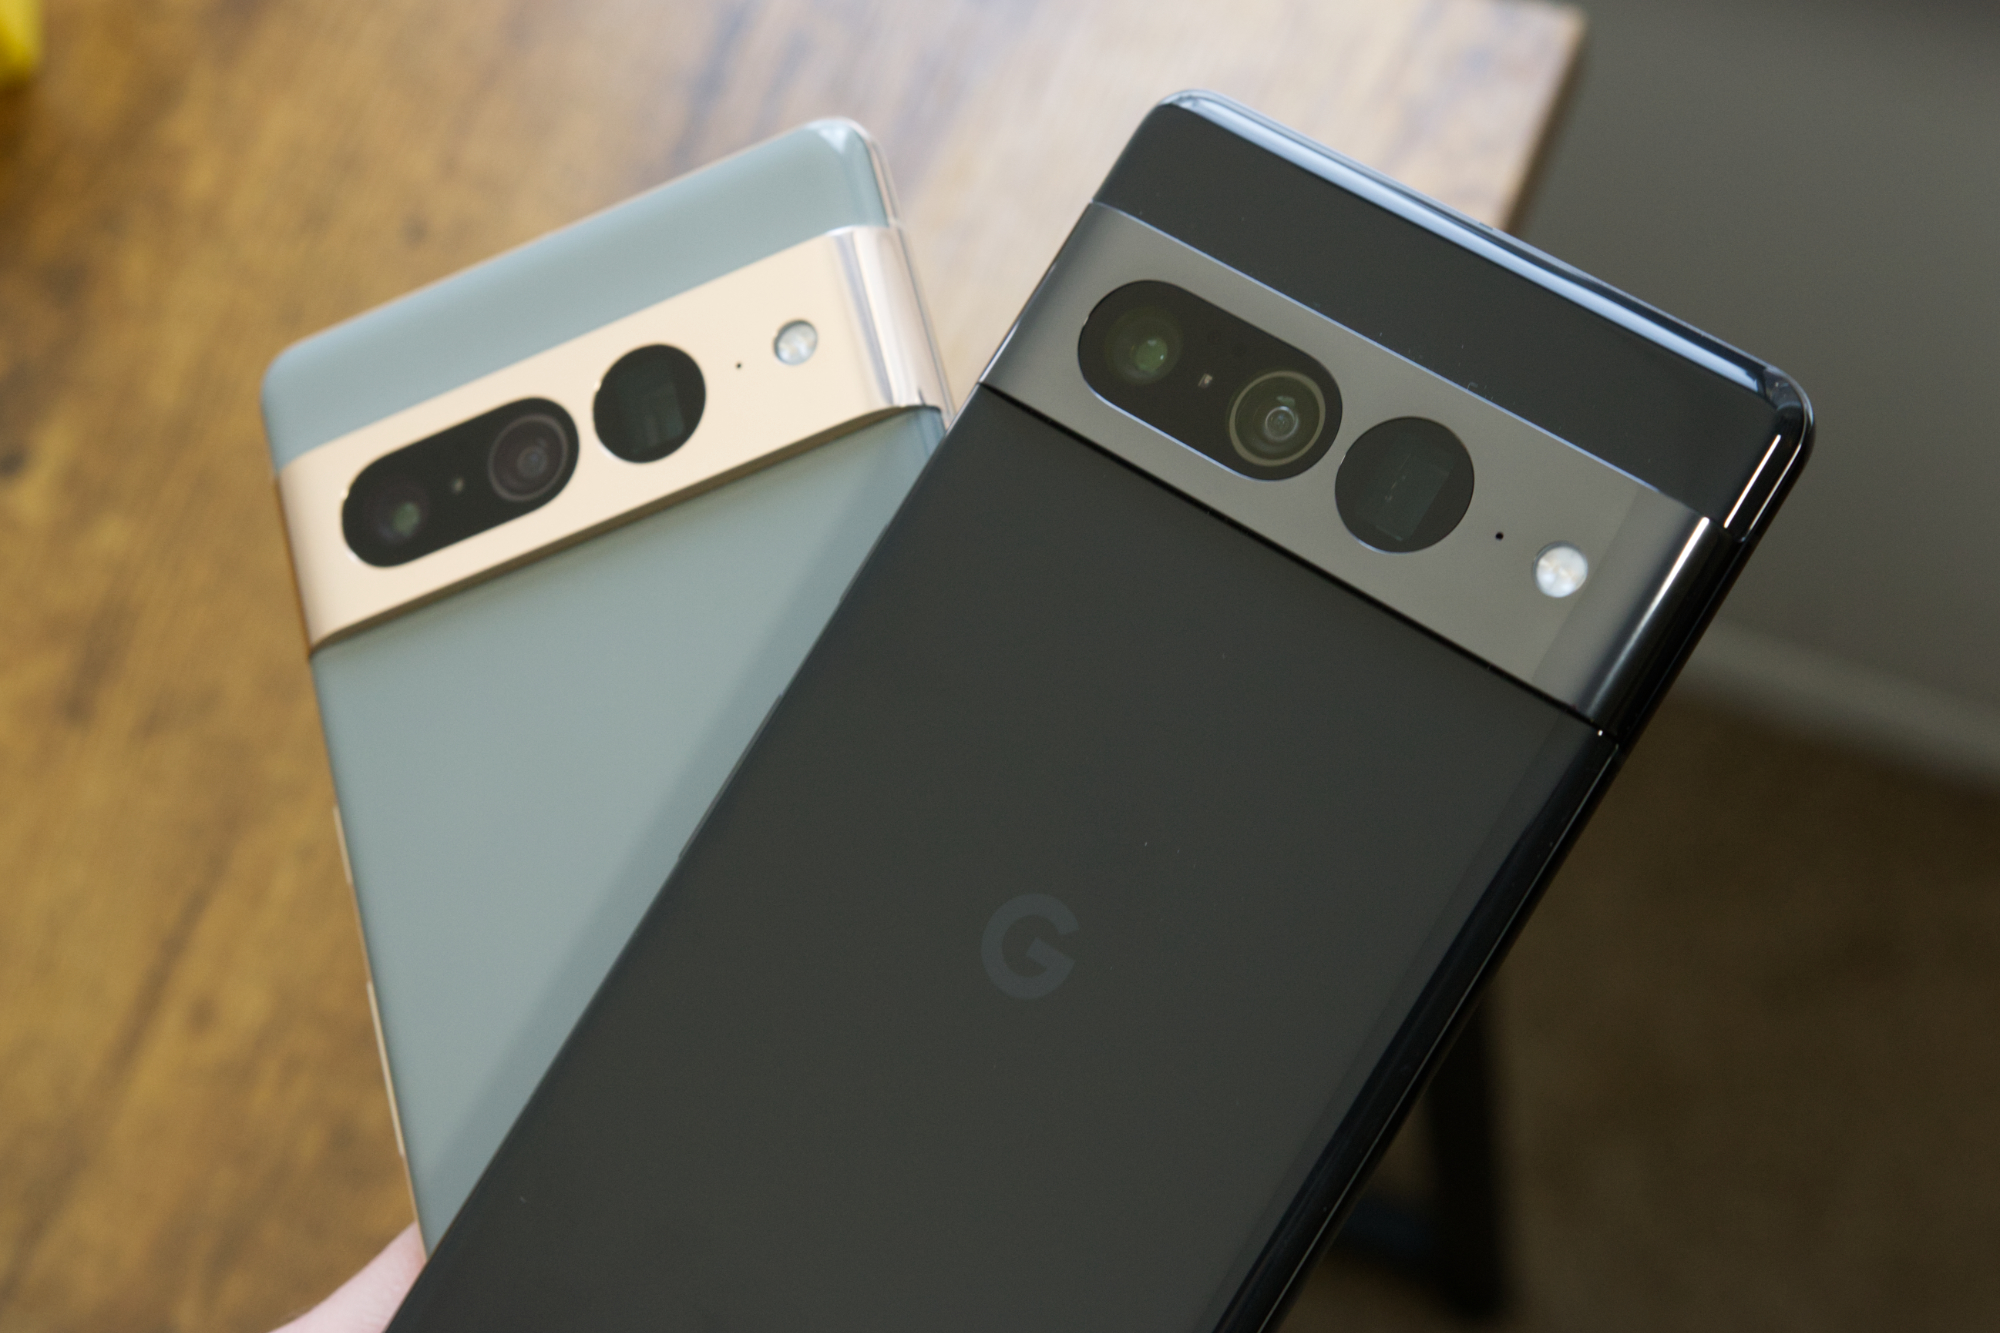 Pixel 7 Pro: Finally! Google fixed my biggest issue with the Pixel 6 Pro